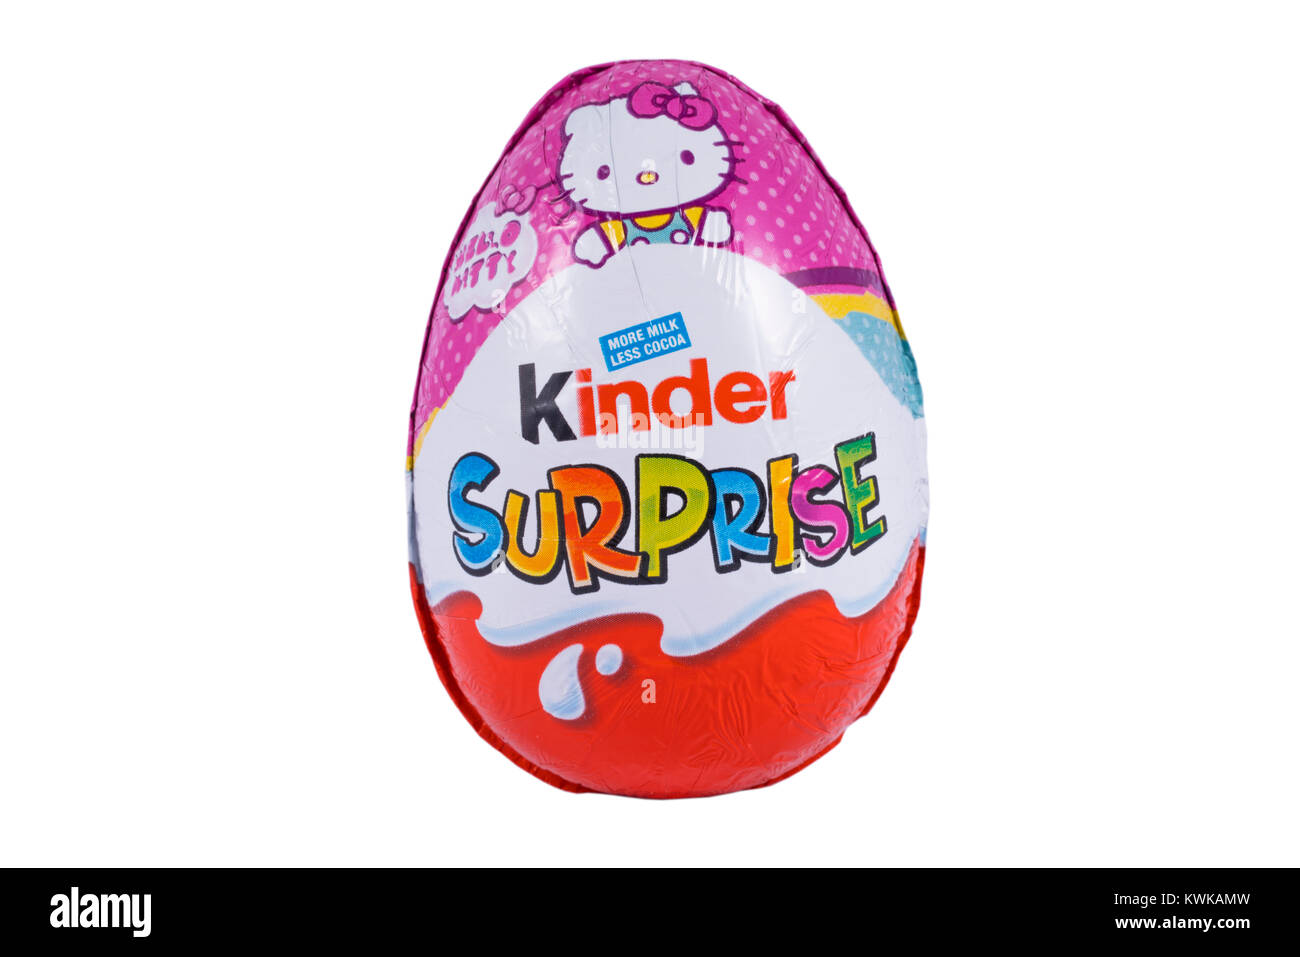 LONDON, UK - DECEMBER 18TH 2017: A Kinder Surprise, or also known as a Kinder Egg, manufactured by Italian company Ferrero, on 18th December 2017. Stock Photo